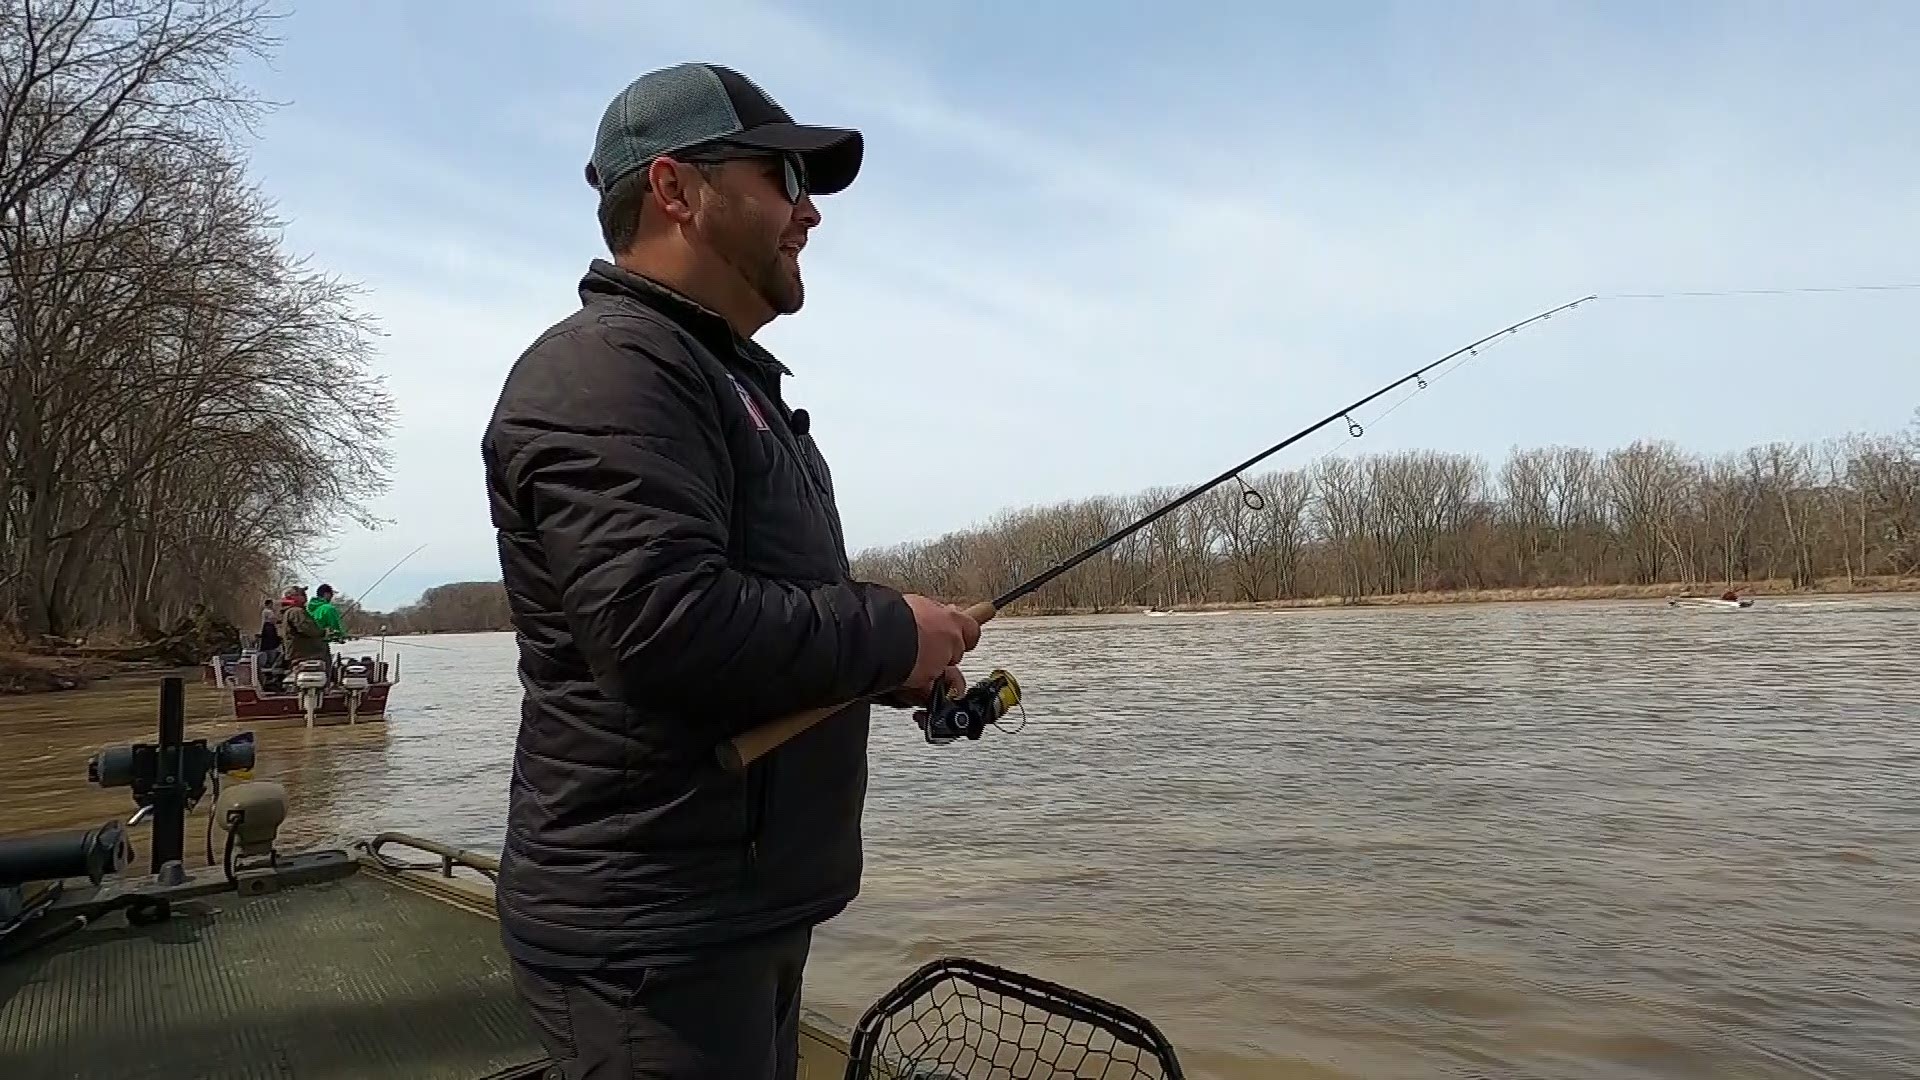 The walleye run brings people from all over the country to northwest Ohio, and right now is one of the best times to trek into the Maumee River to catch walleye.